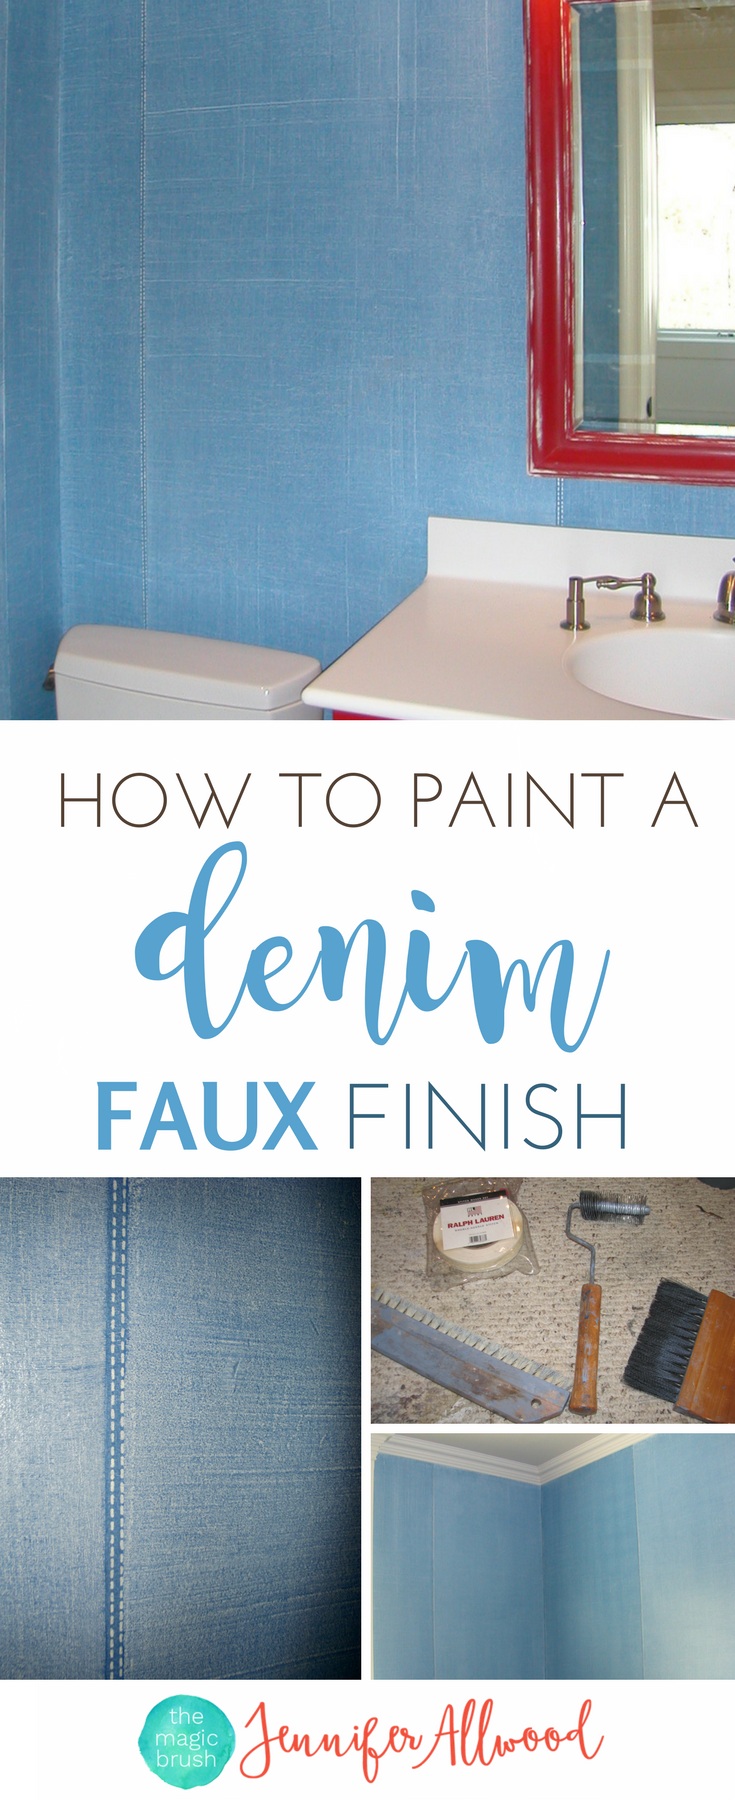 Yes, leather paint is a thing – Jennifer Allwood Home